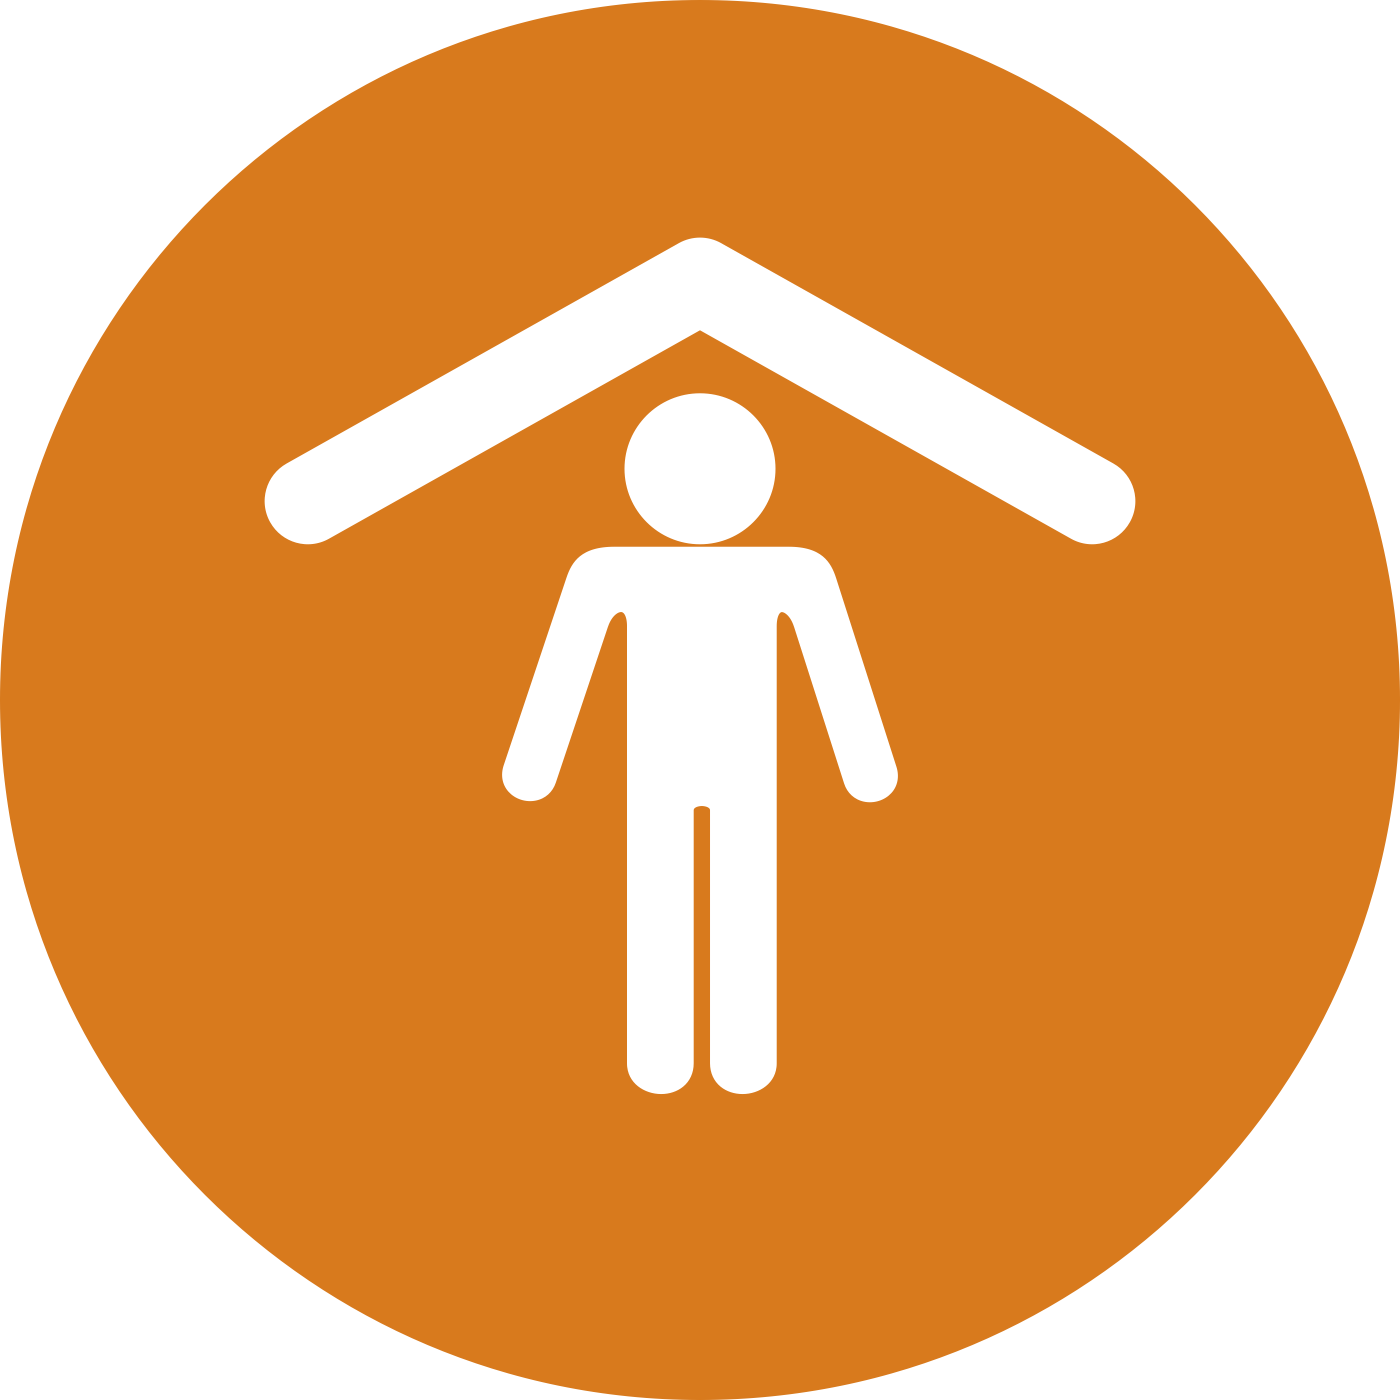 A roof over a person's head indicating shelter status